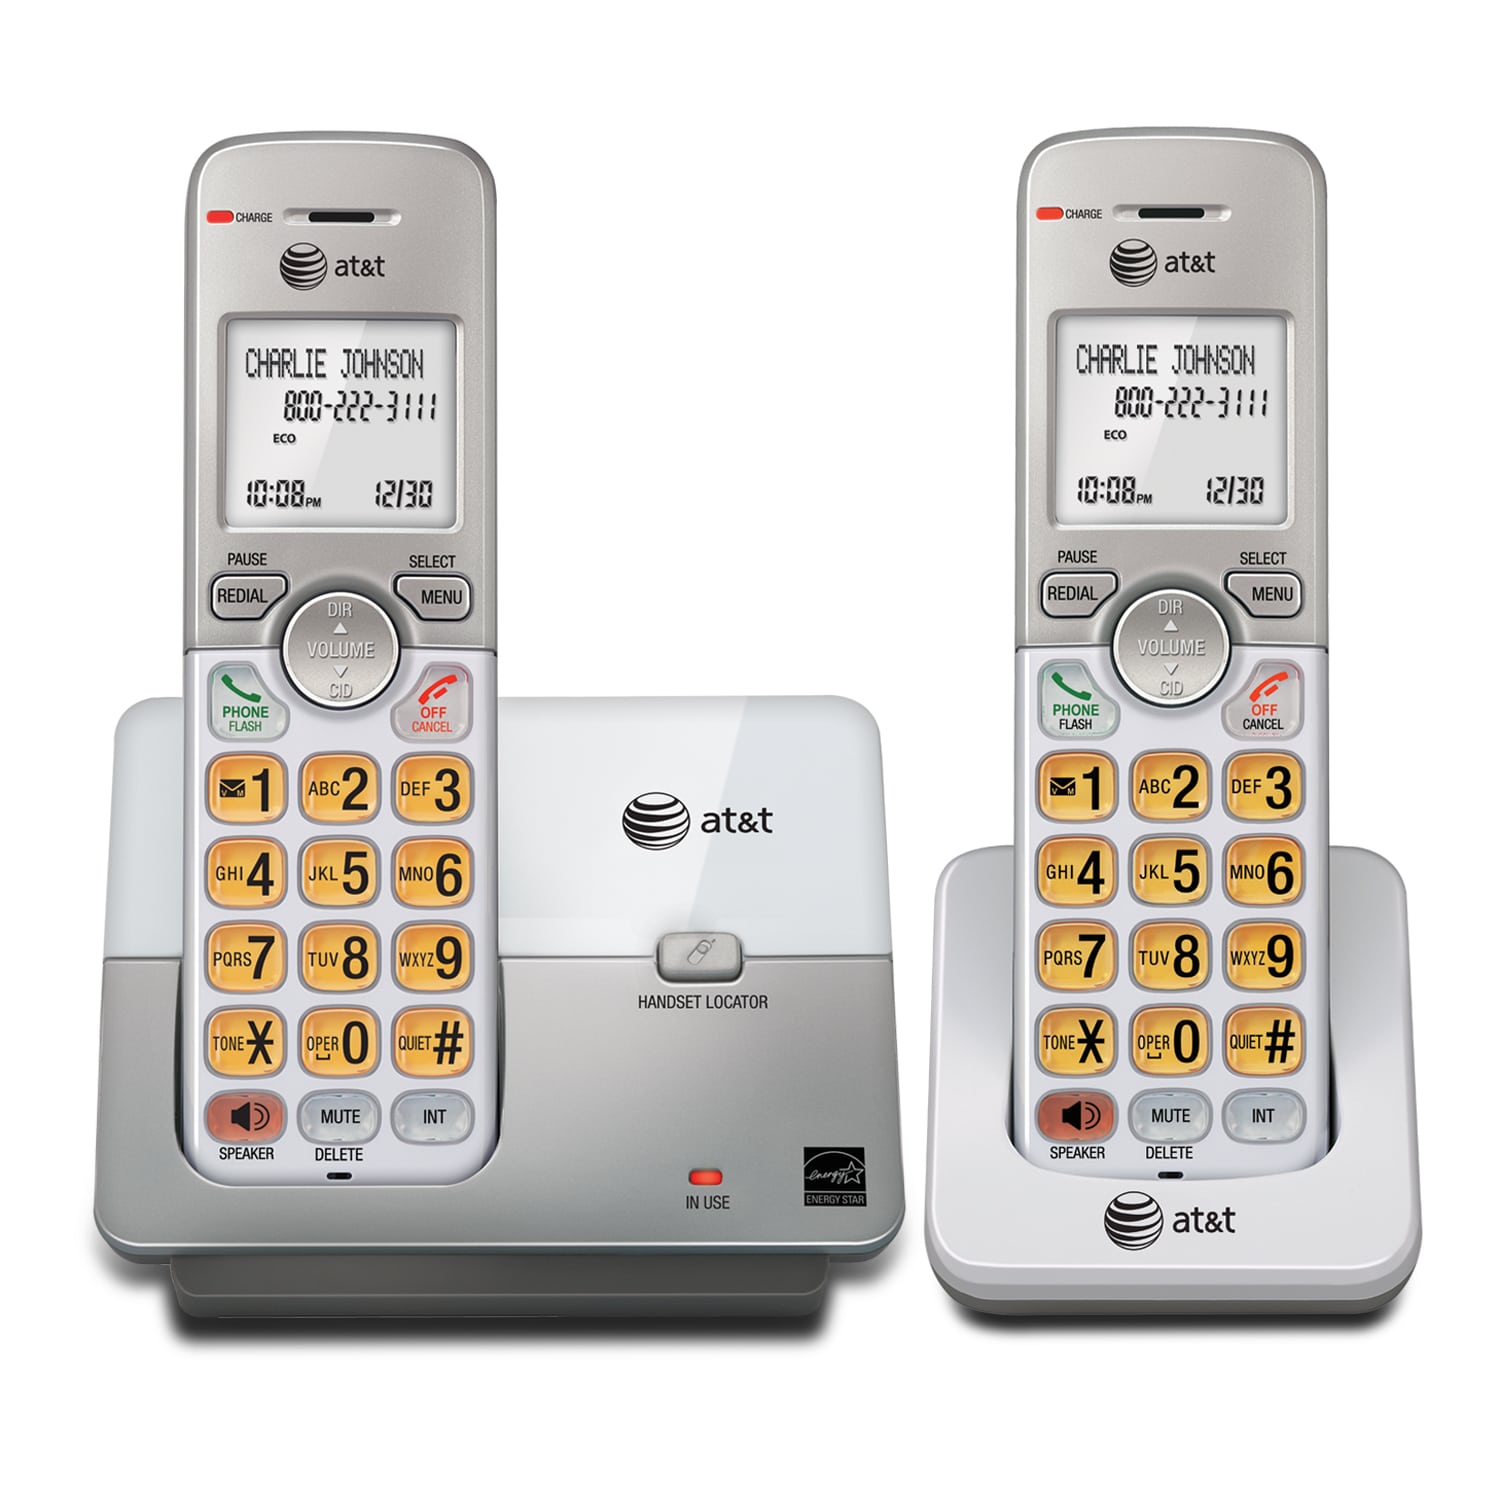 2 handset cordless phone system with caller ID/call waiting - view 1